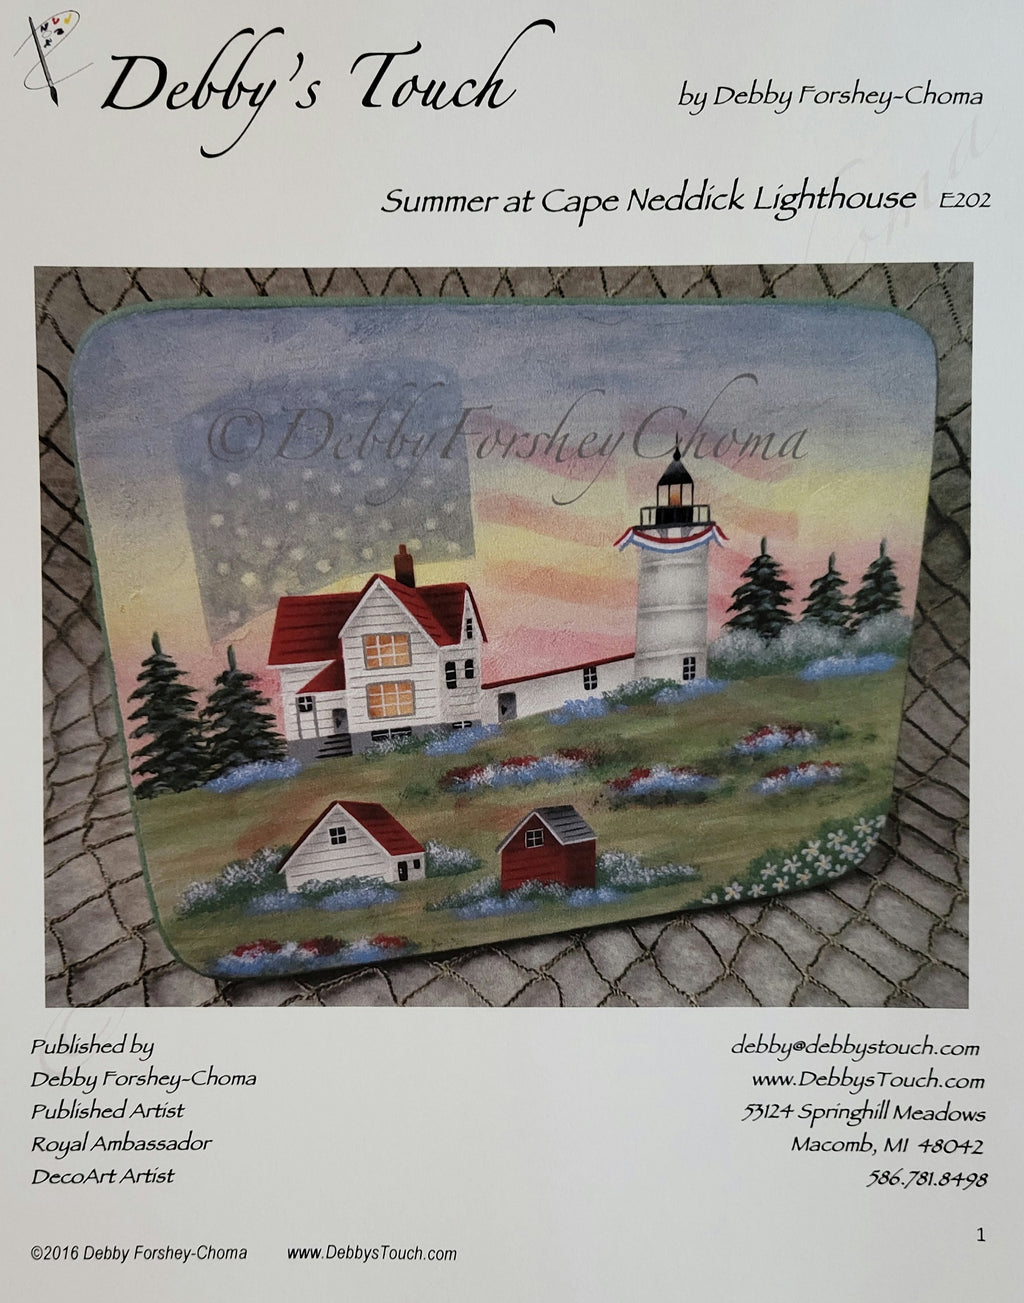 Summer at Cape Neddick Lighthouse packet by Debby's Touch